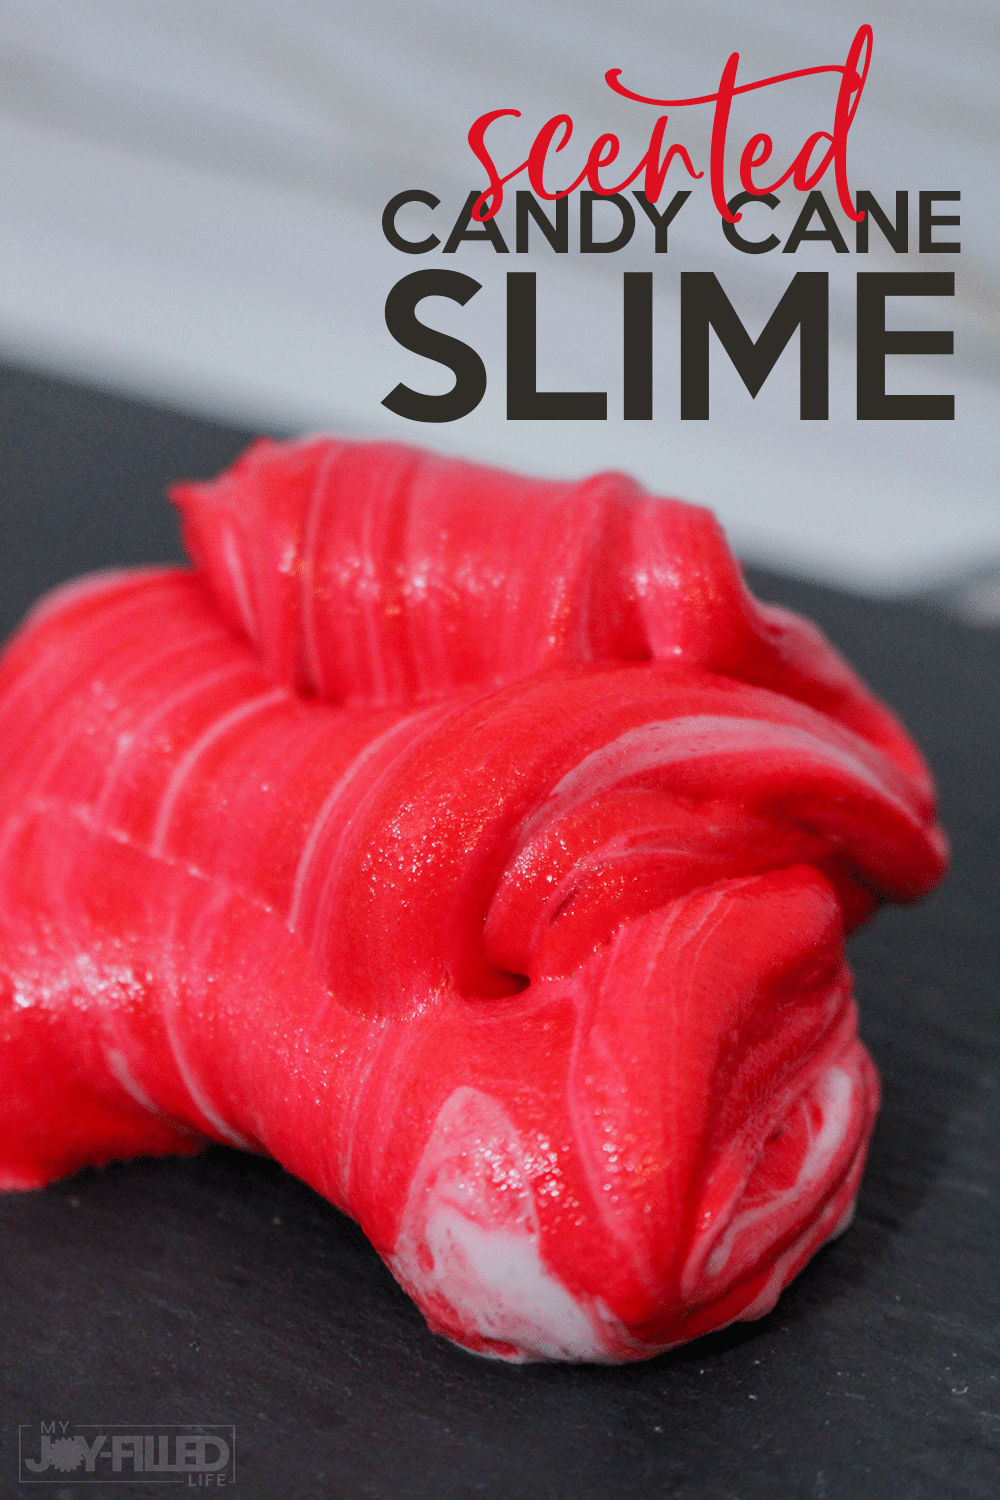 This candy cane slime is such a fun slime recipe for Christmas - it even smells like peppermint! Kids will have so much fun getting into the Christmas spirit with this slime. #slime #slimerecipe #christmas #candycanes #christmasslime